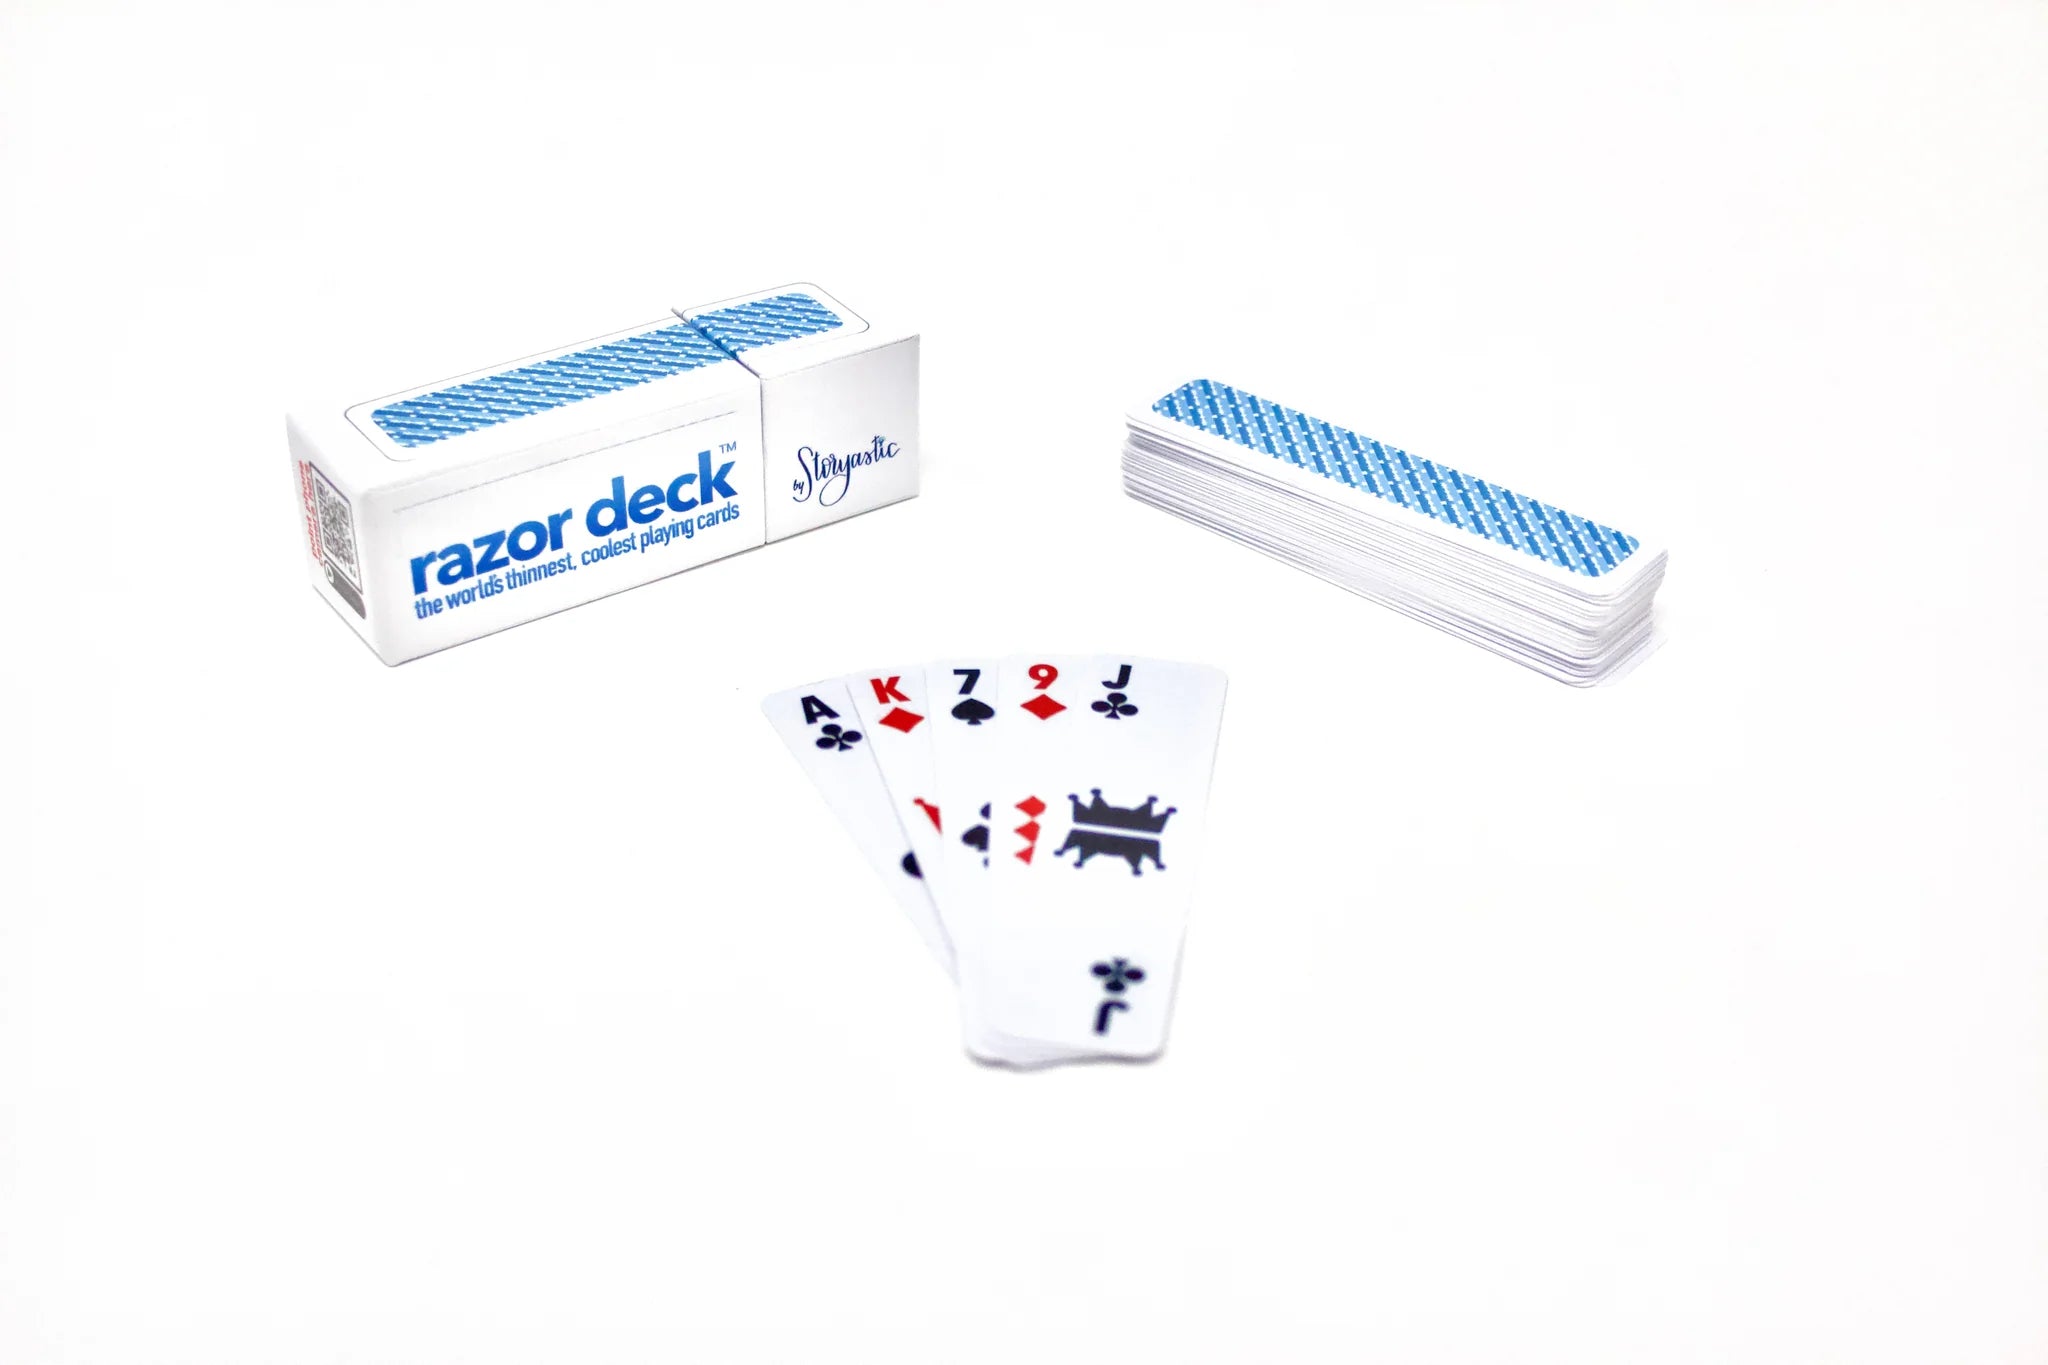 Razor Deck - World's Thinnest Playing Cards